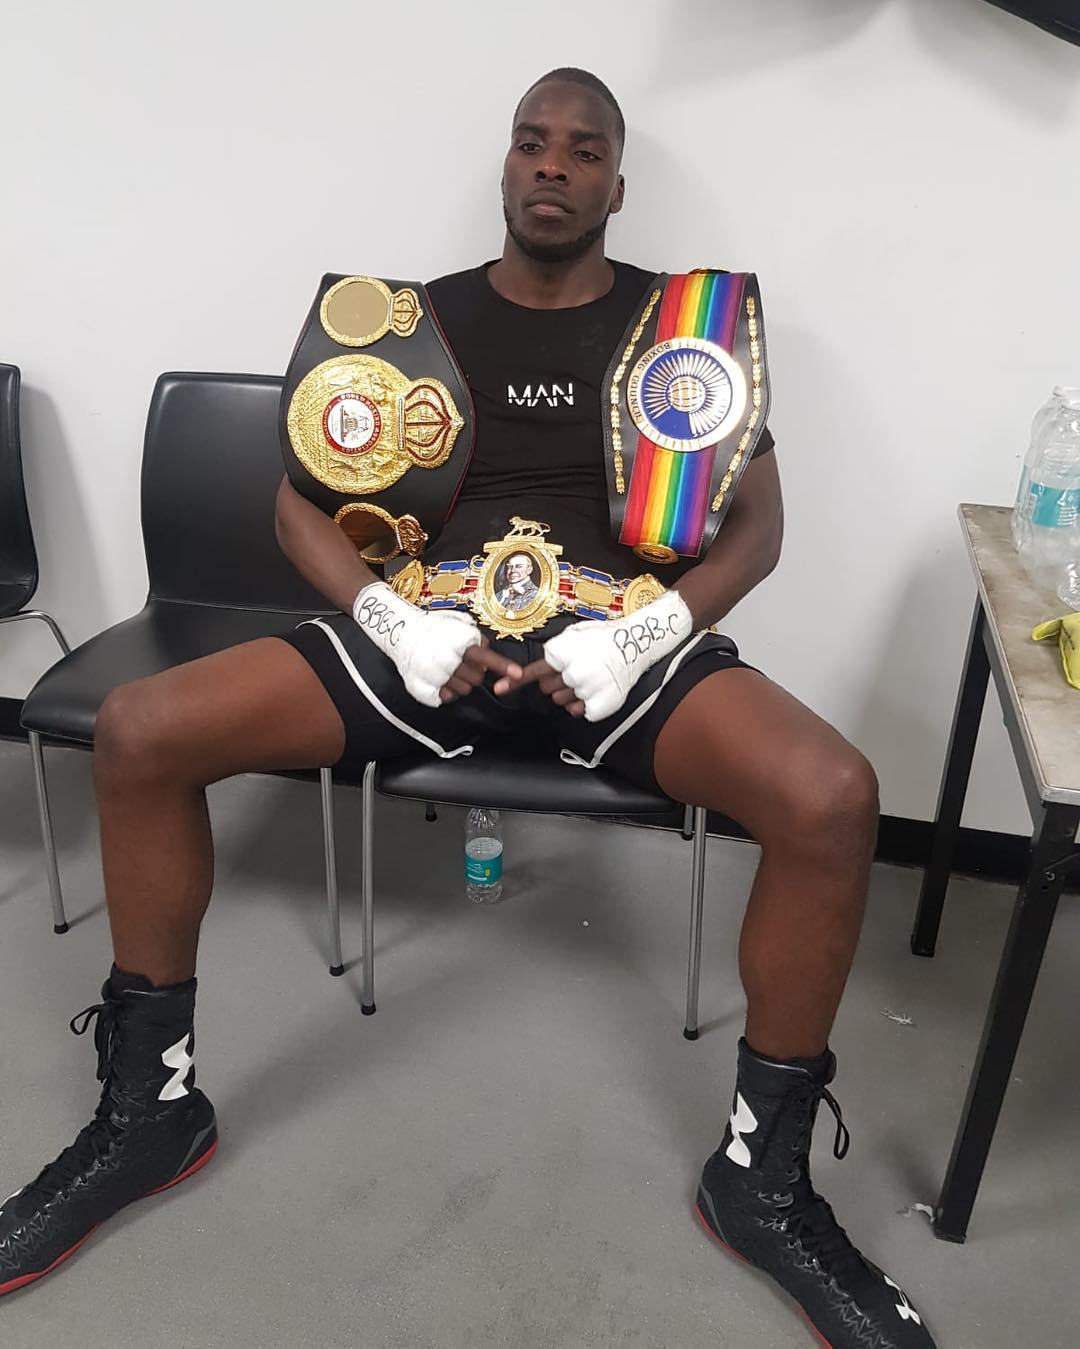 Weight Lawrence Okolie Weighs Pounds To Pounds